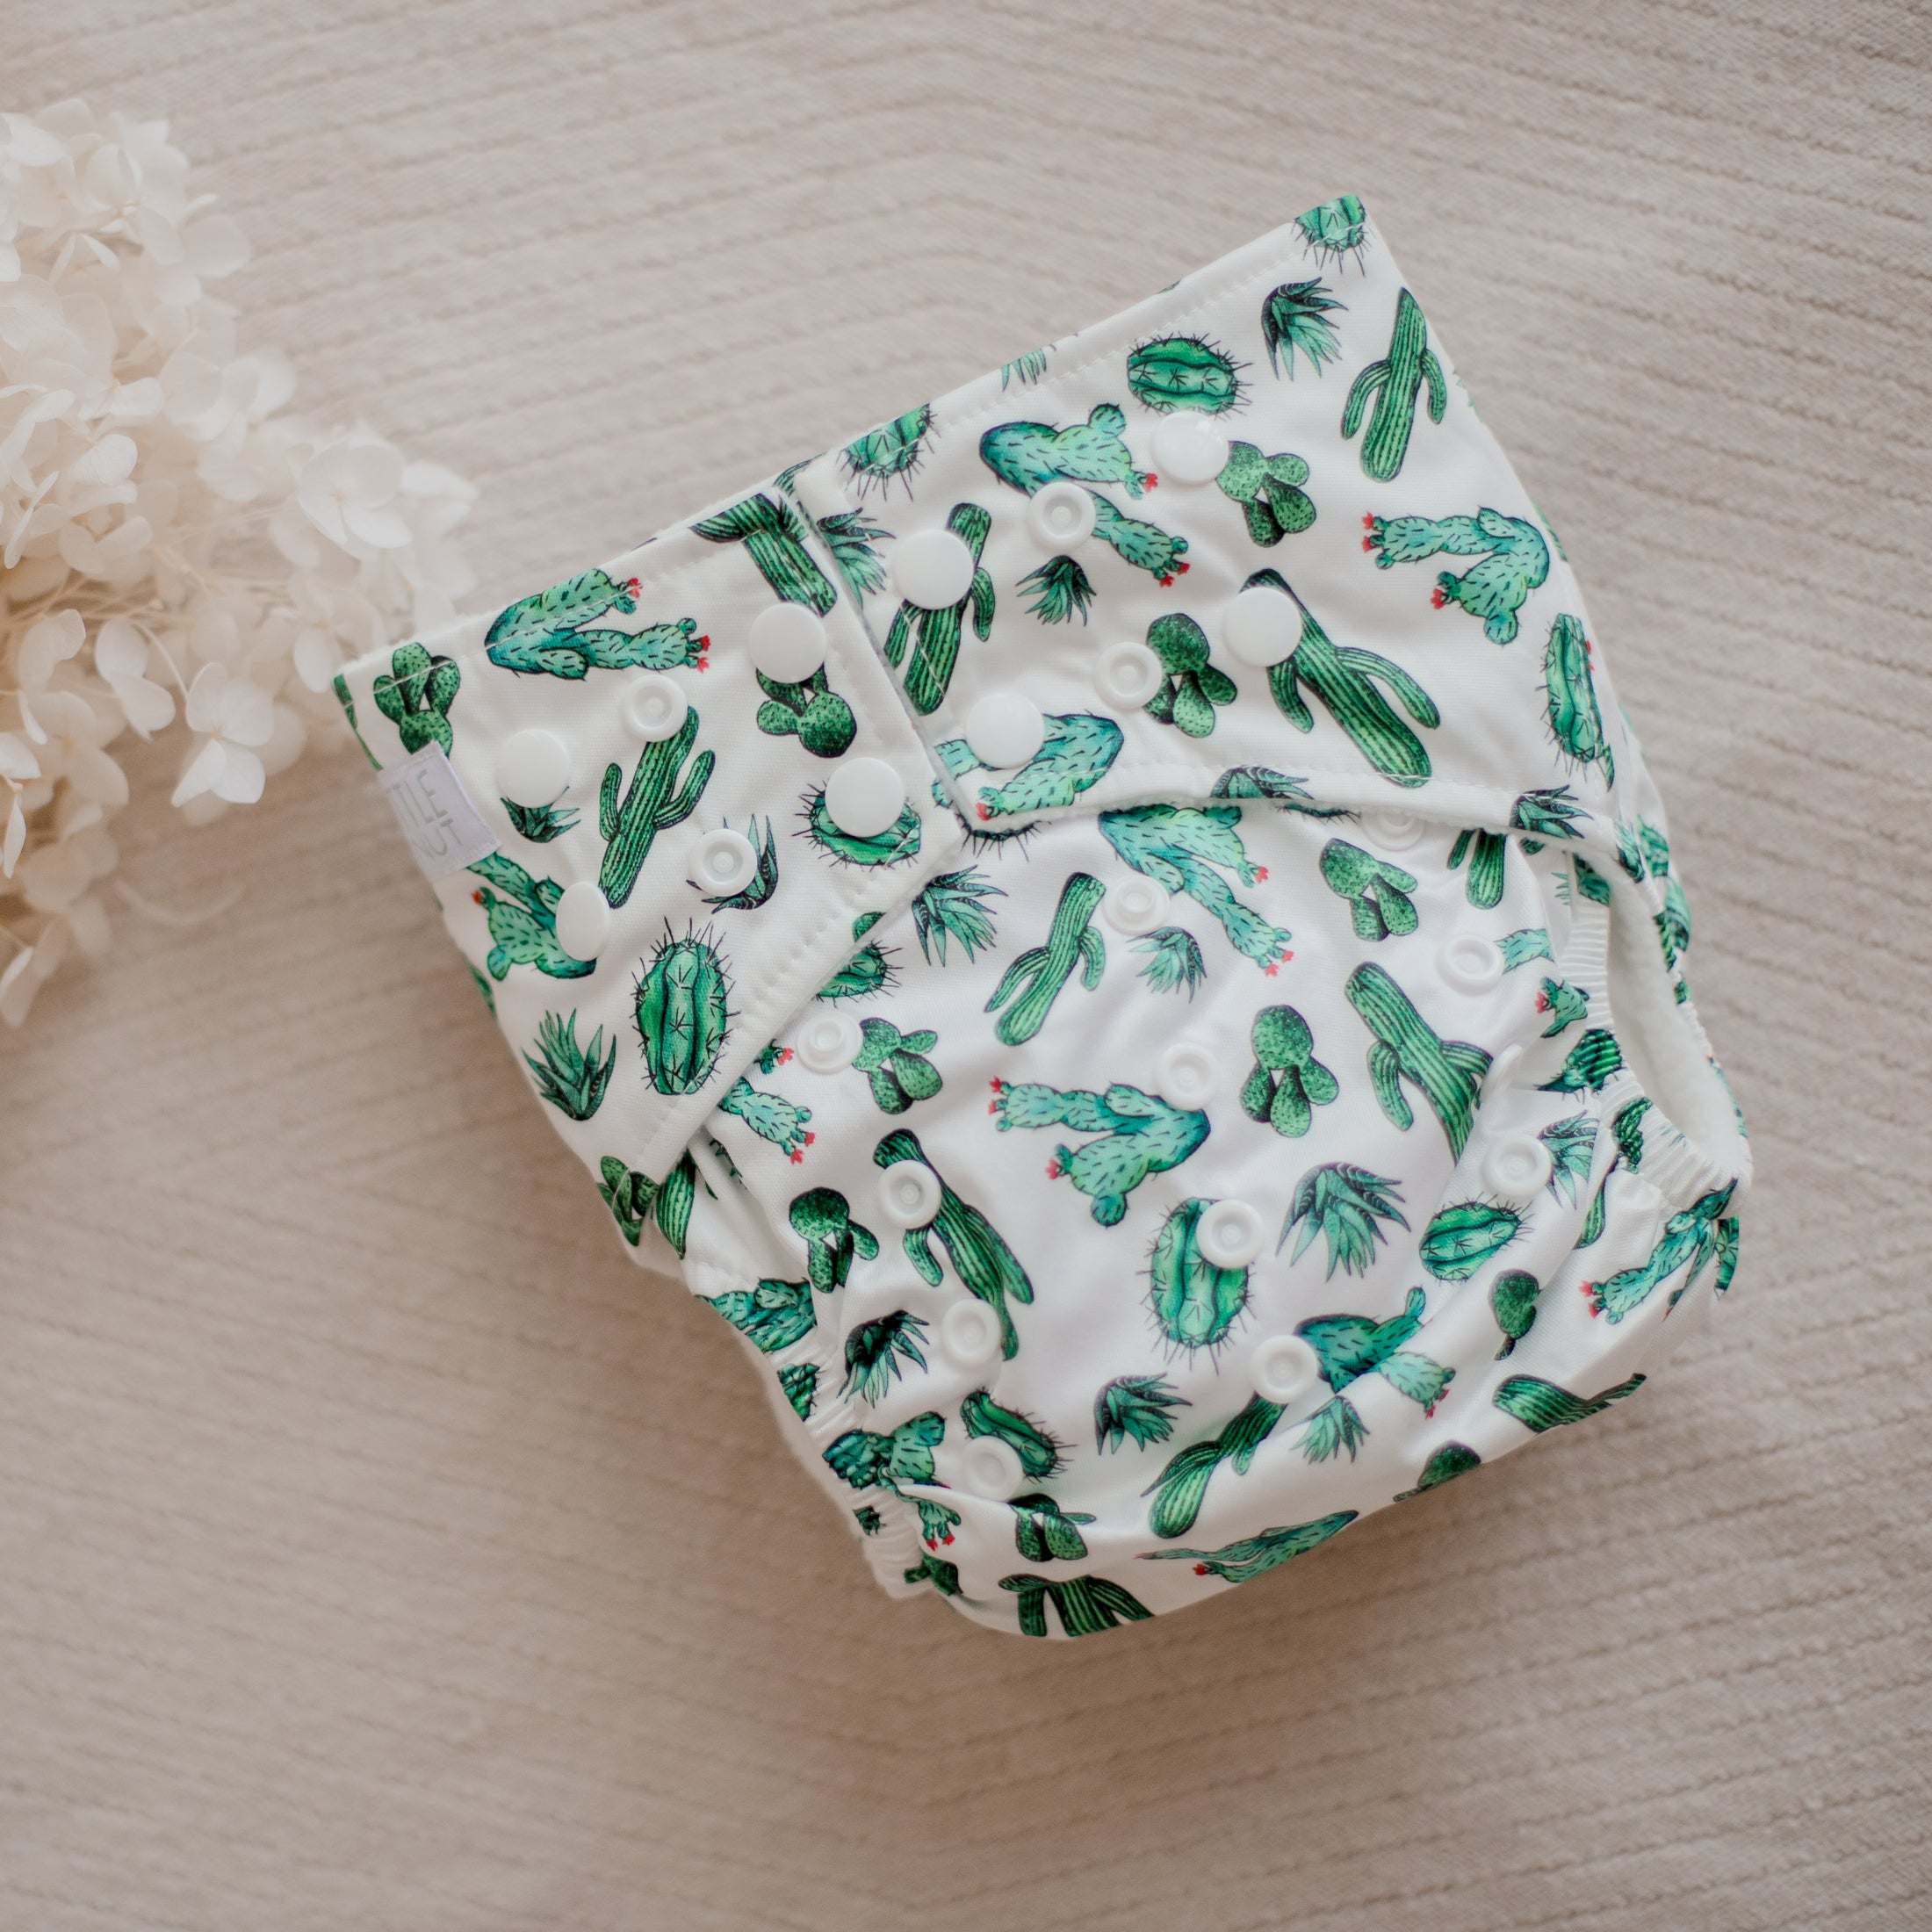 Cactus Cloth Nappy by My Little Gumnut. Reusable Cloth Nappies Australia. Bamboo cloth nappies. 